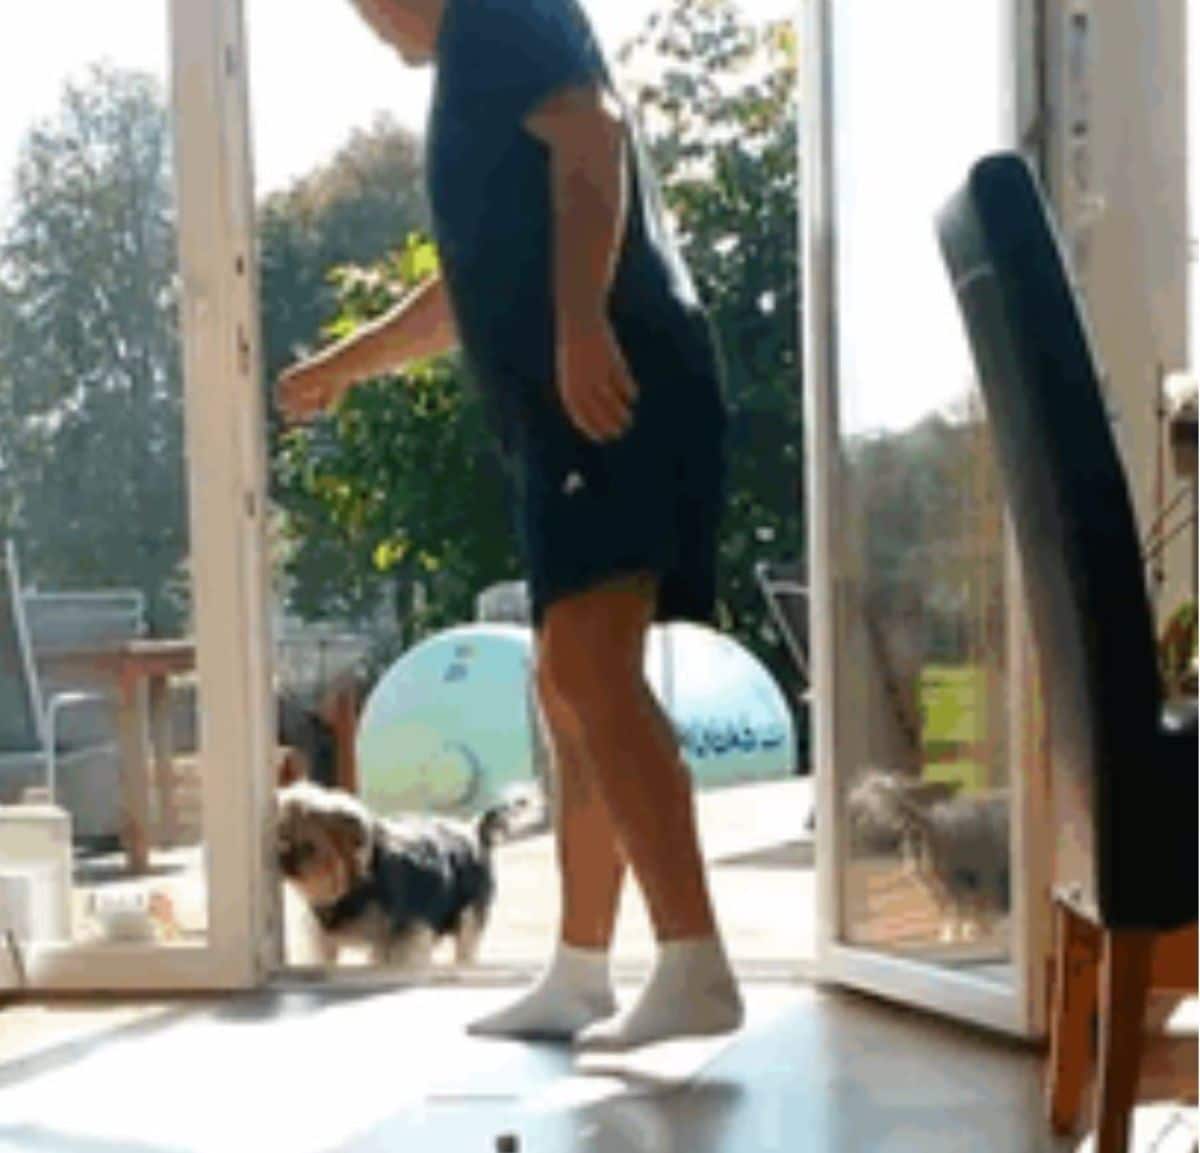 man pretending to open a terrace door for small black and brown dog to come in